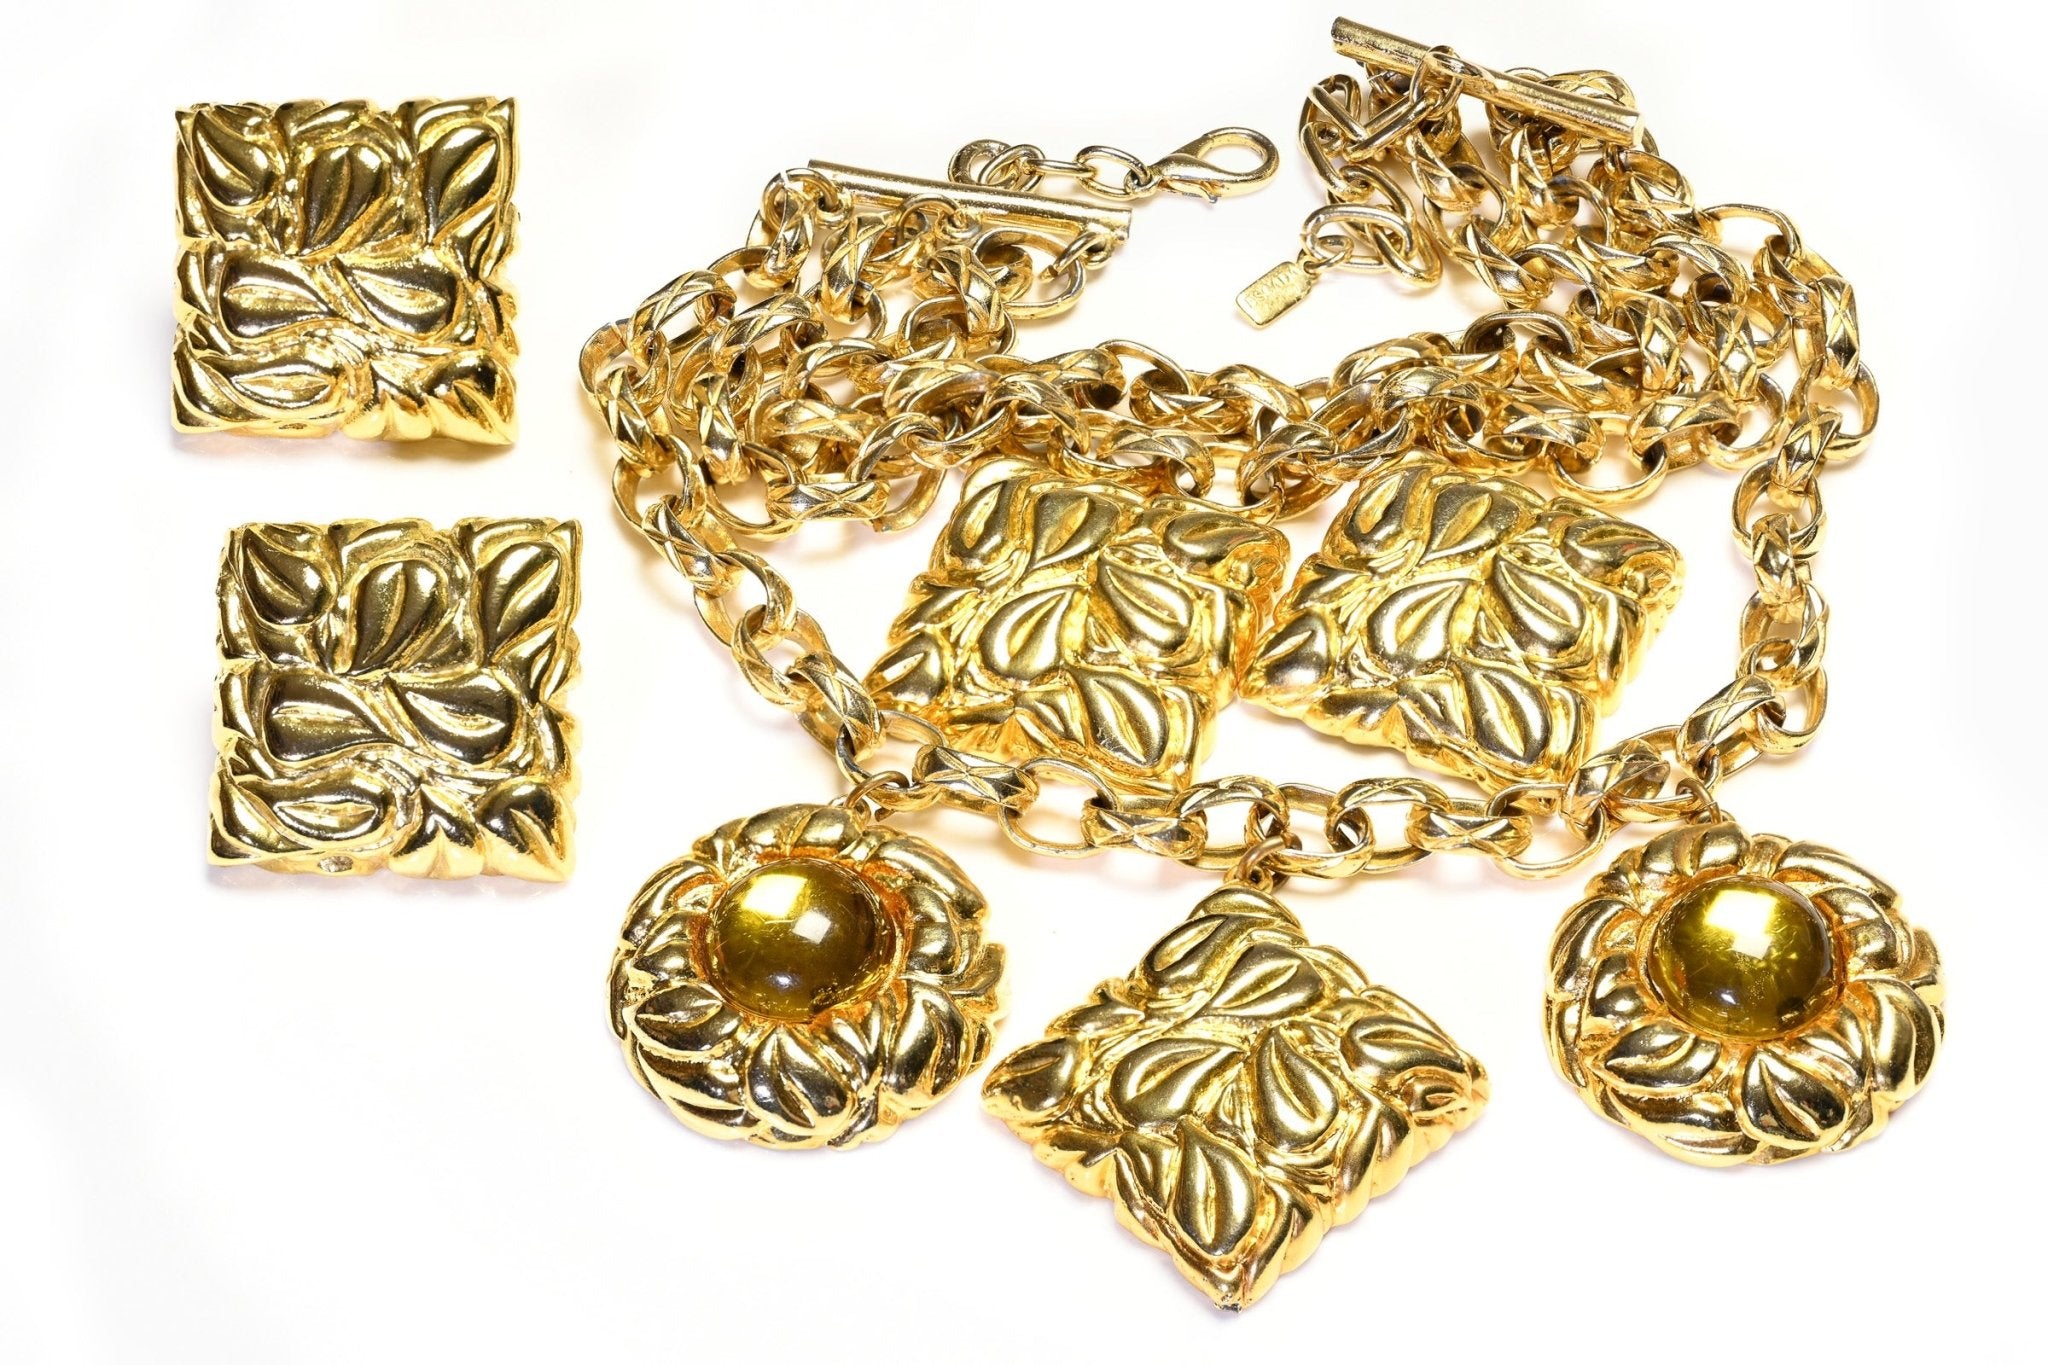 Vintage 1990’s Escada Yellow Cabochon Charm Chain Necklace Earrings Set